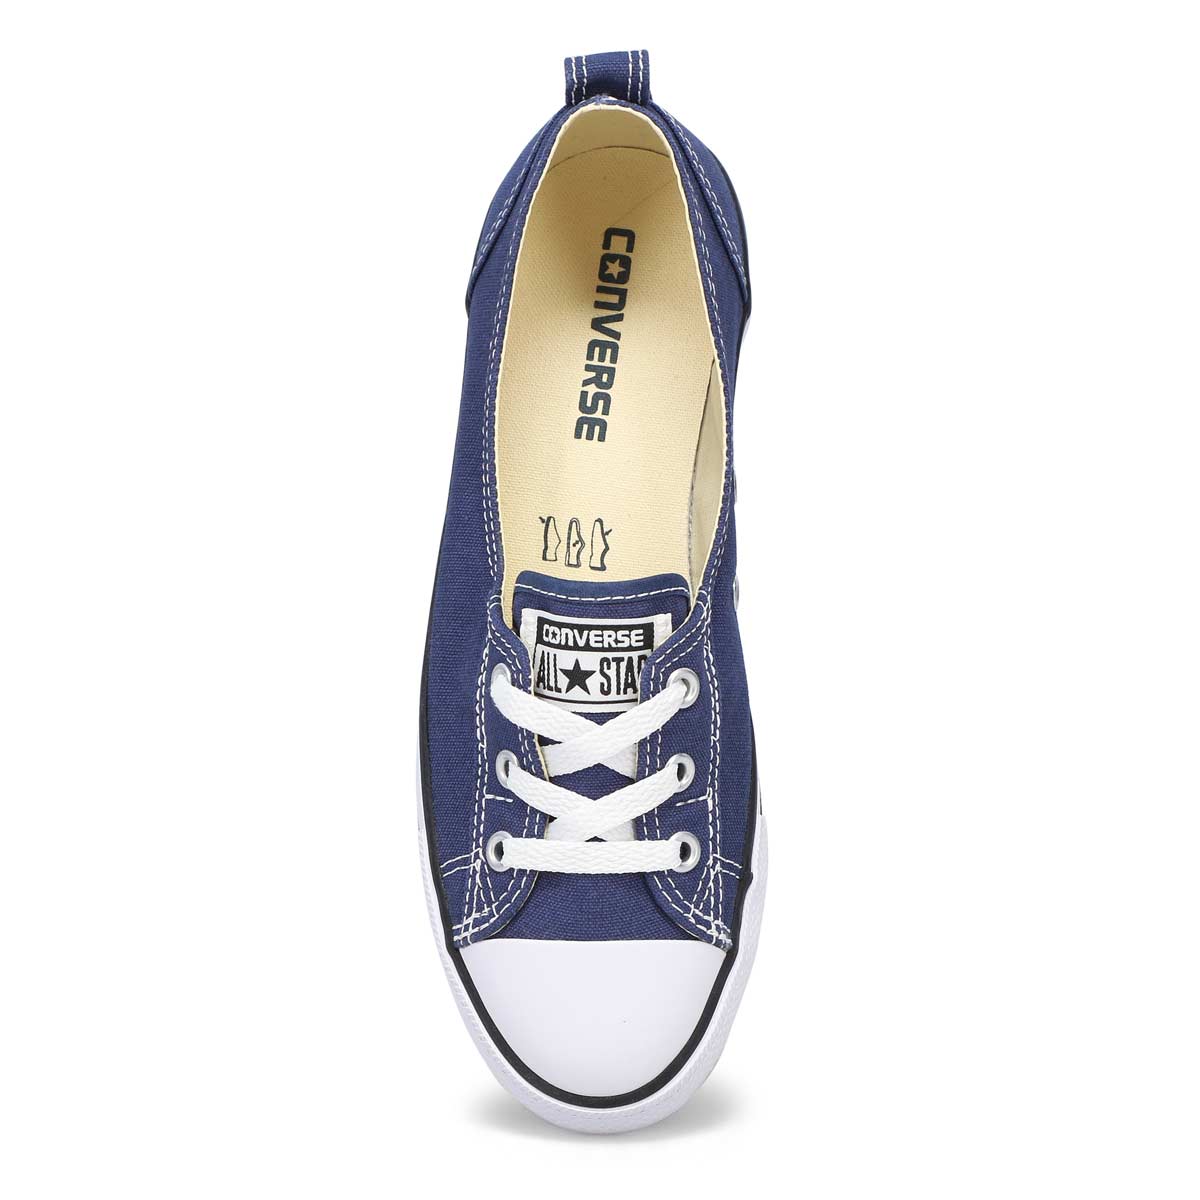 Converse Women's CT ALL STAR BALLET LACE navy slip-ons